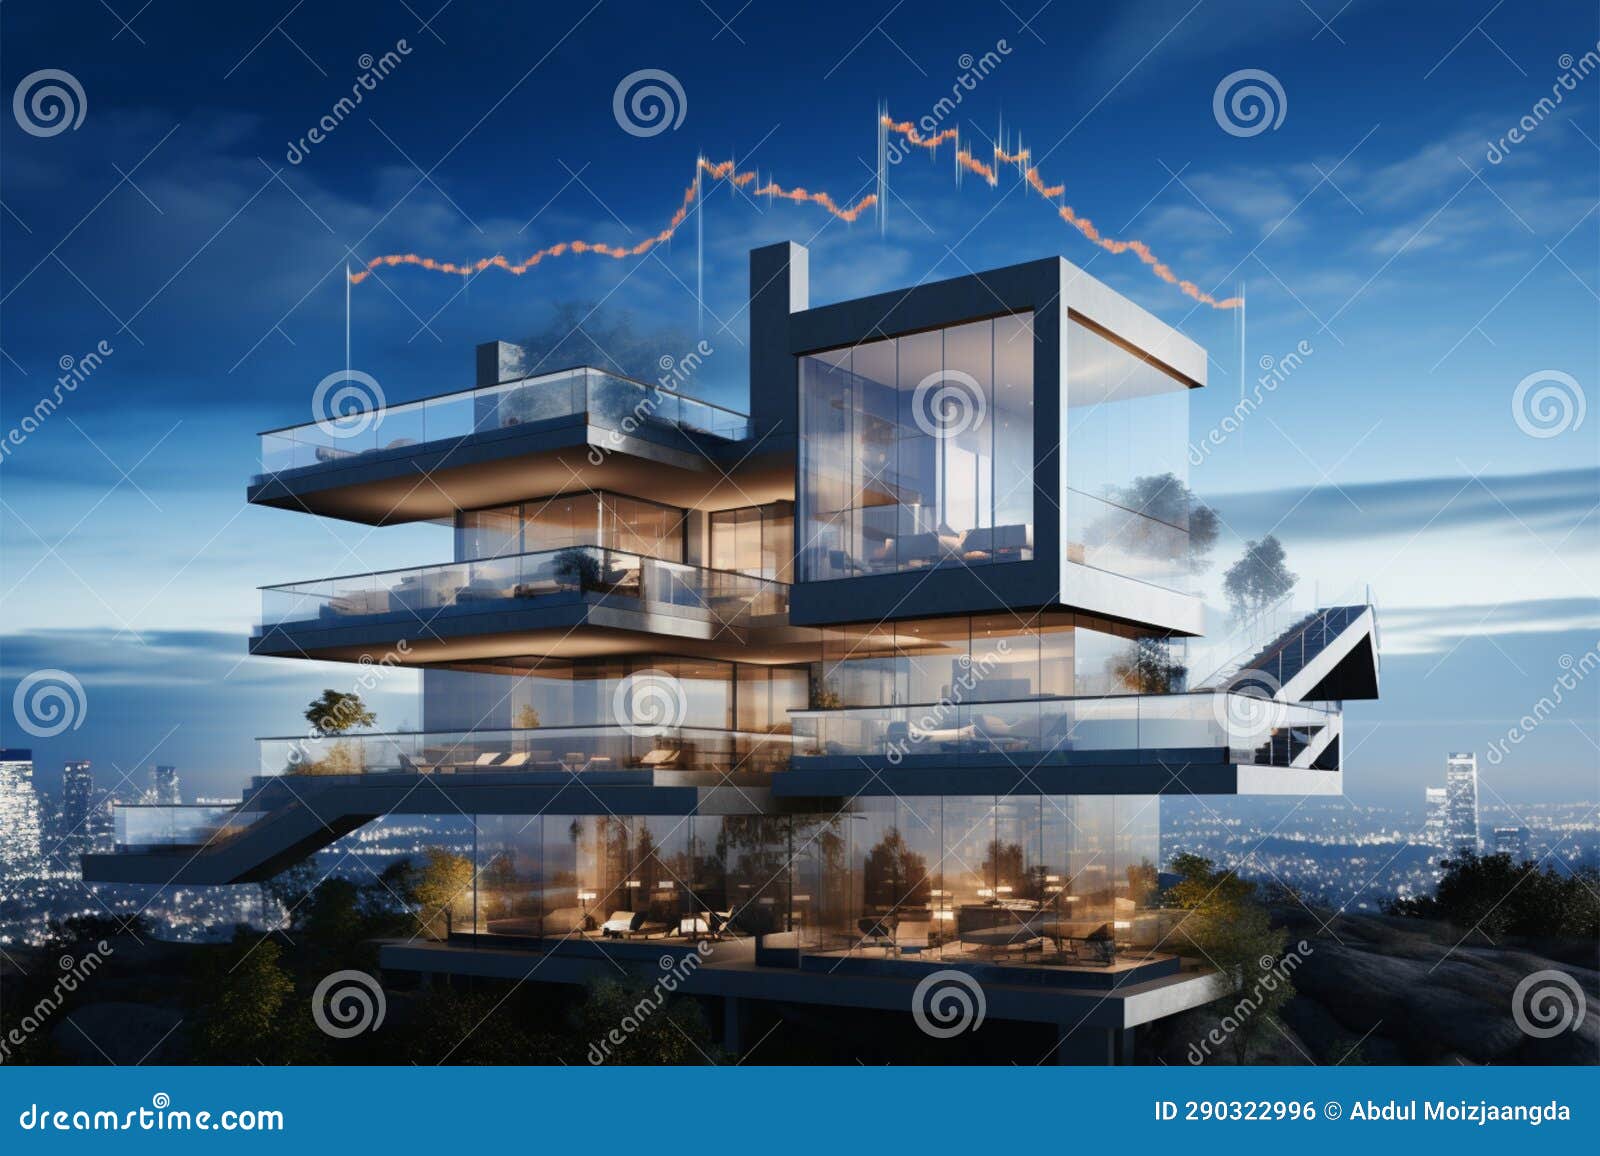 creating and ing contemporary real estate structures defines business success